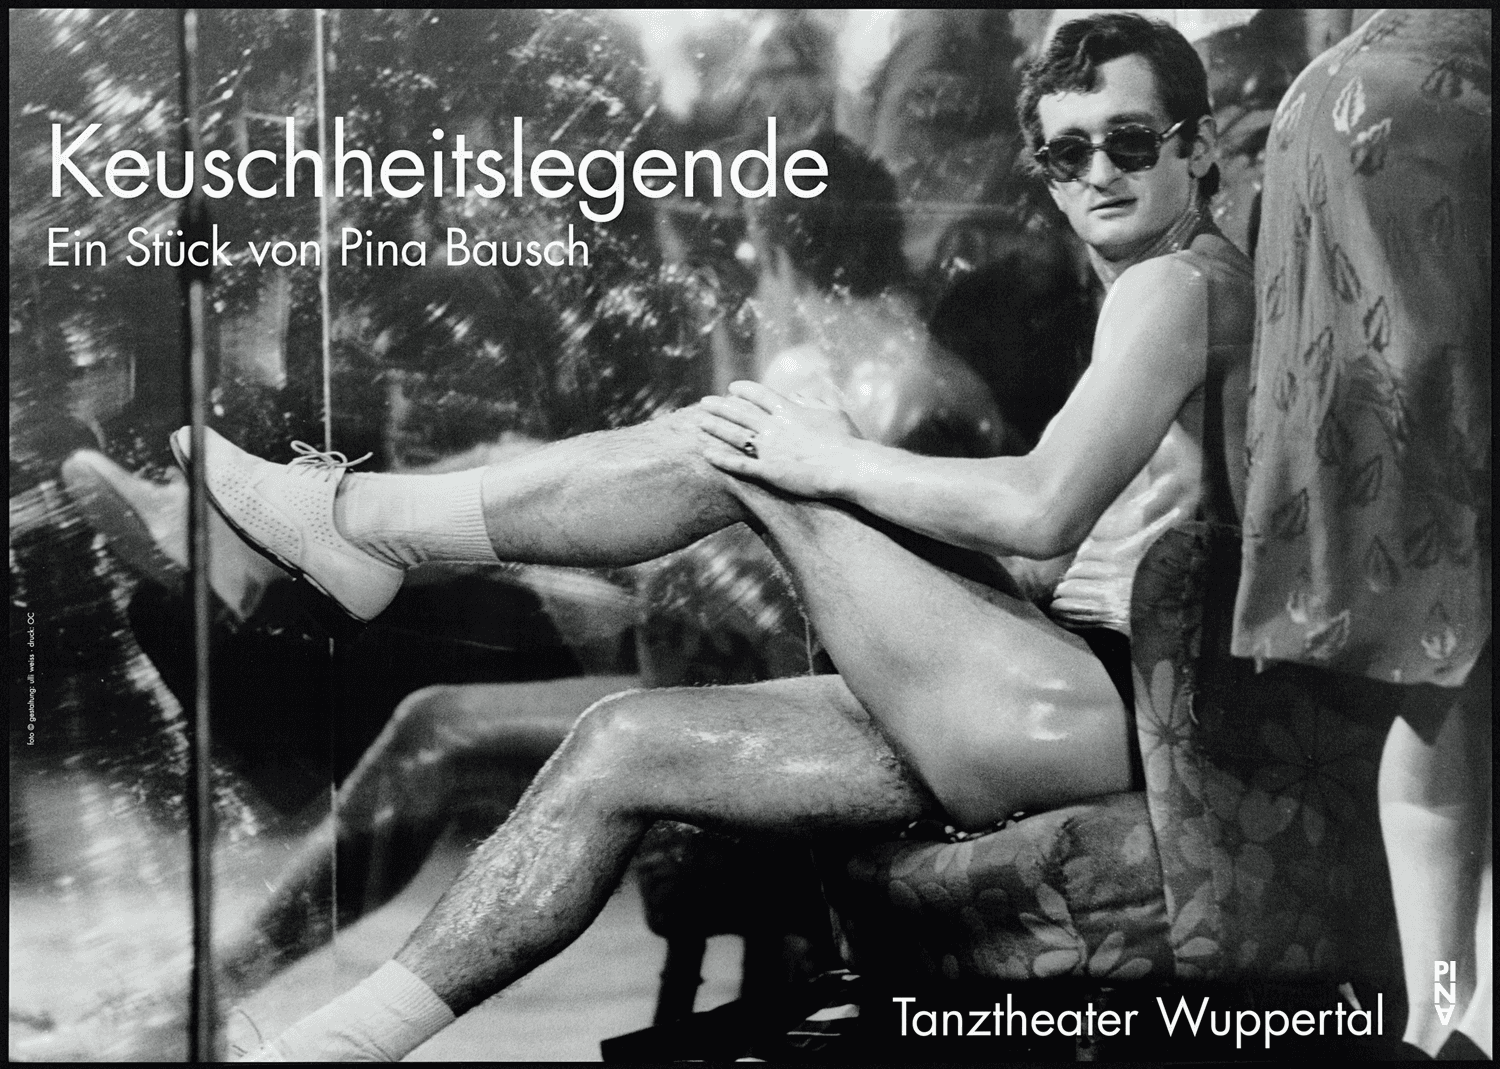 Poster for “Keuschheitslegende (Legend of Chastity)” by Pina Bausch